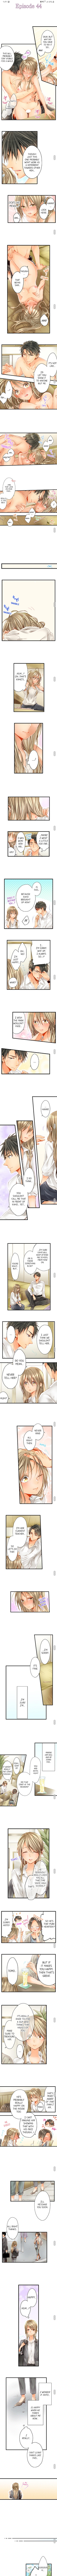 25-Year-Old High School Girl, I Wouldn’t Do This with a Kid Ch.44